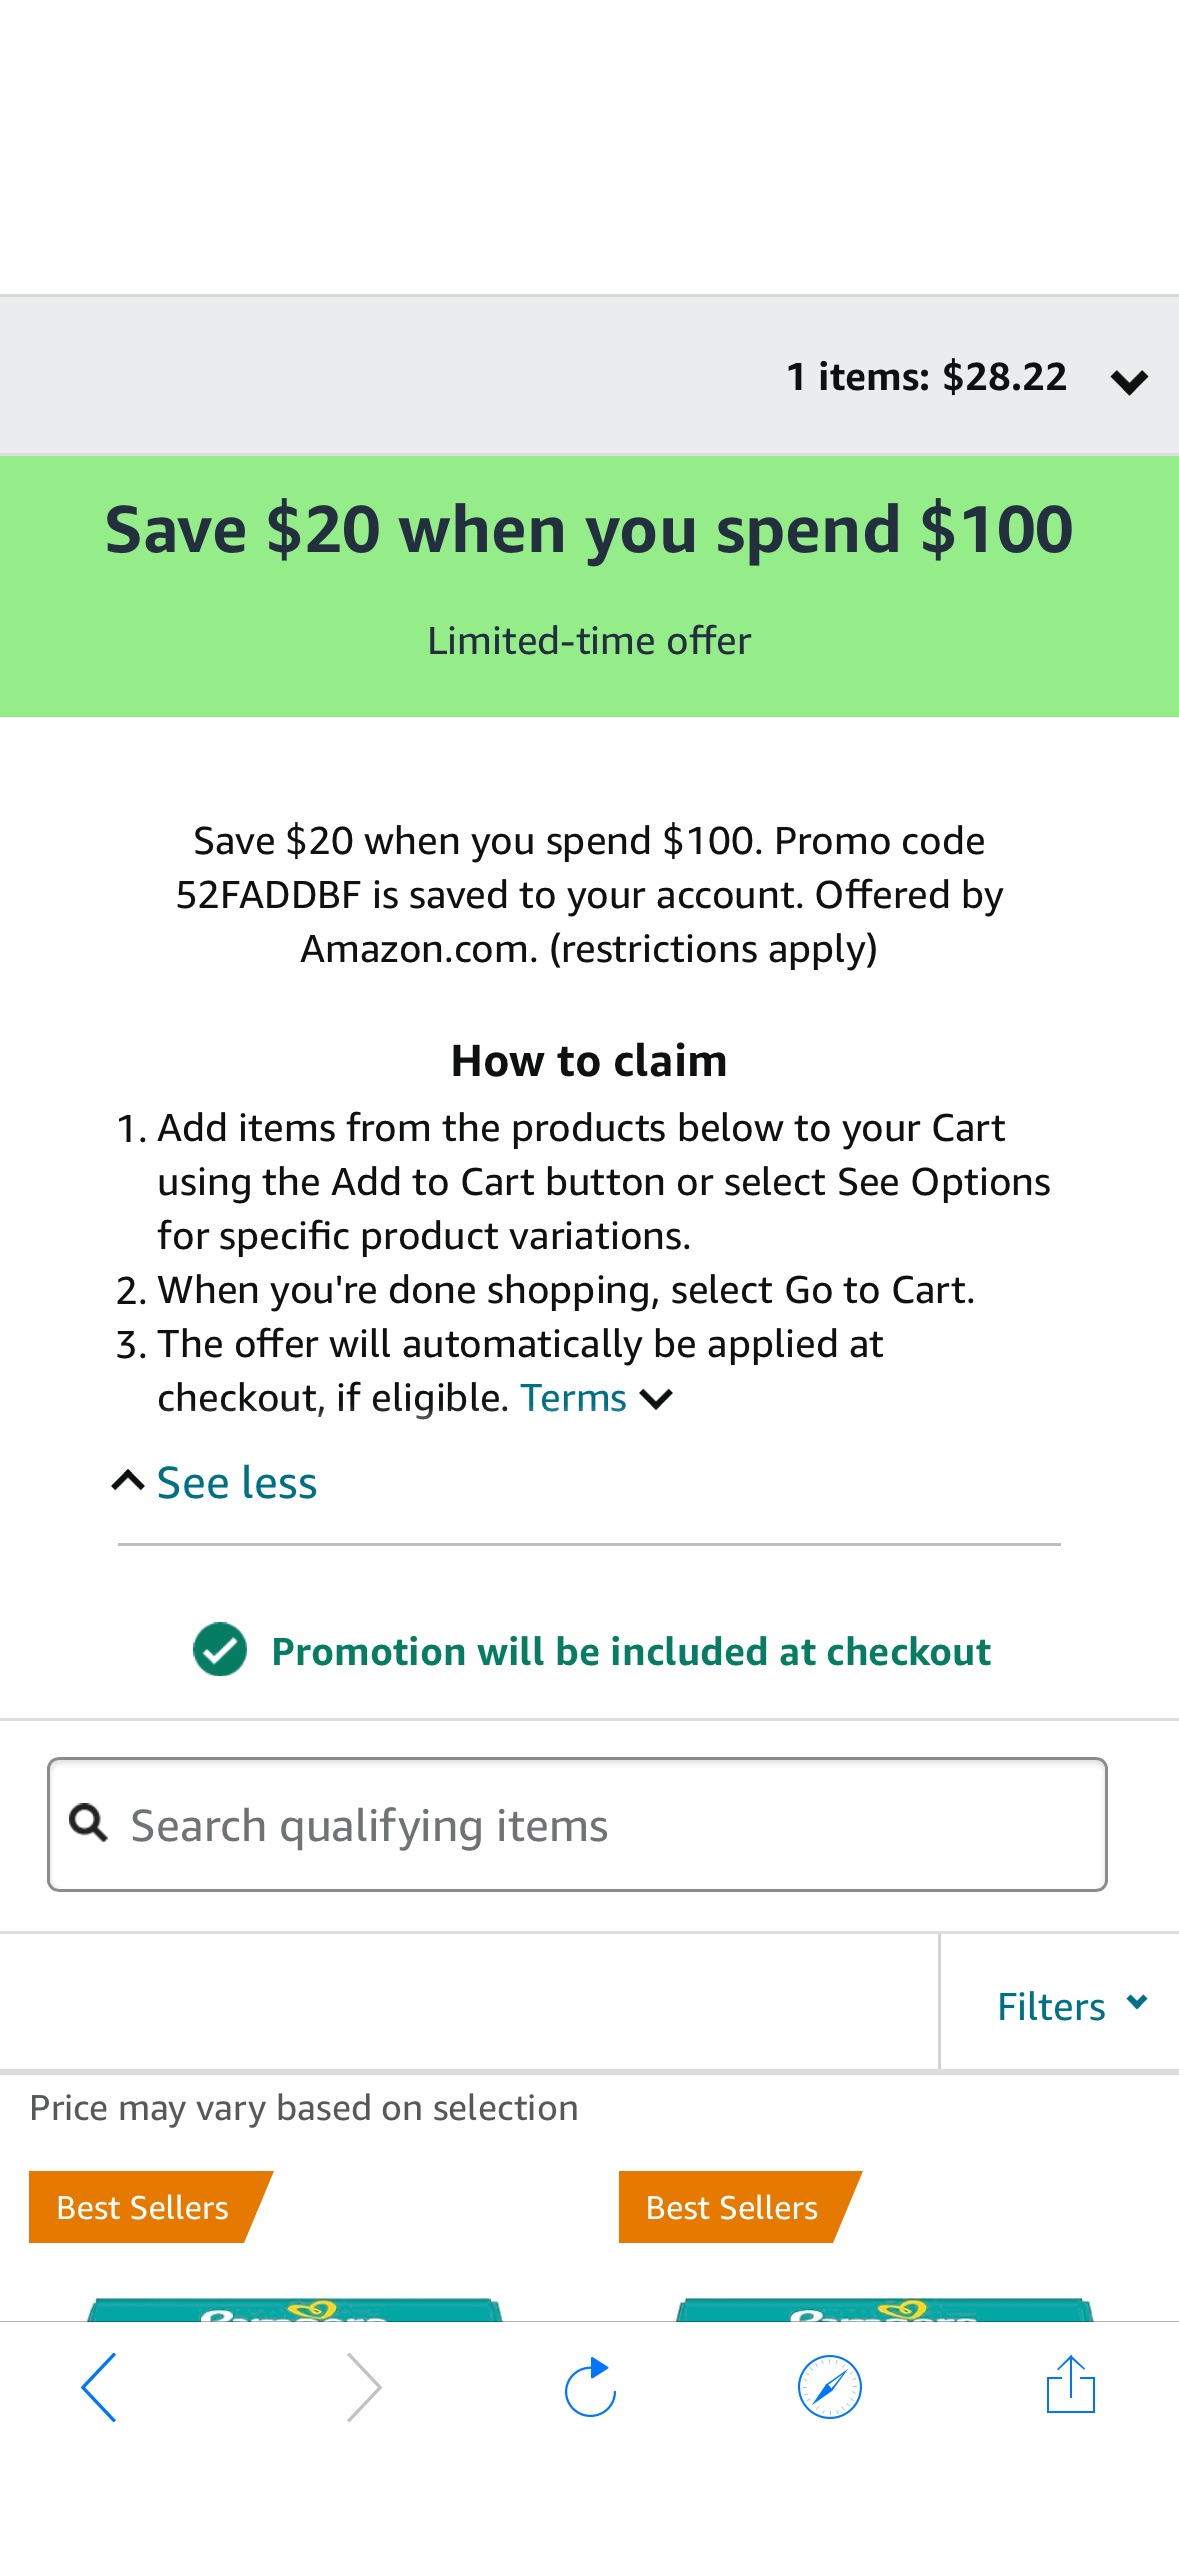 Amazon.com: Save $20 when you spend $100 promotion尿不湿